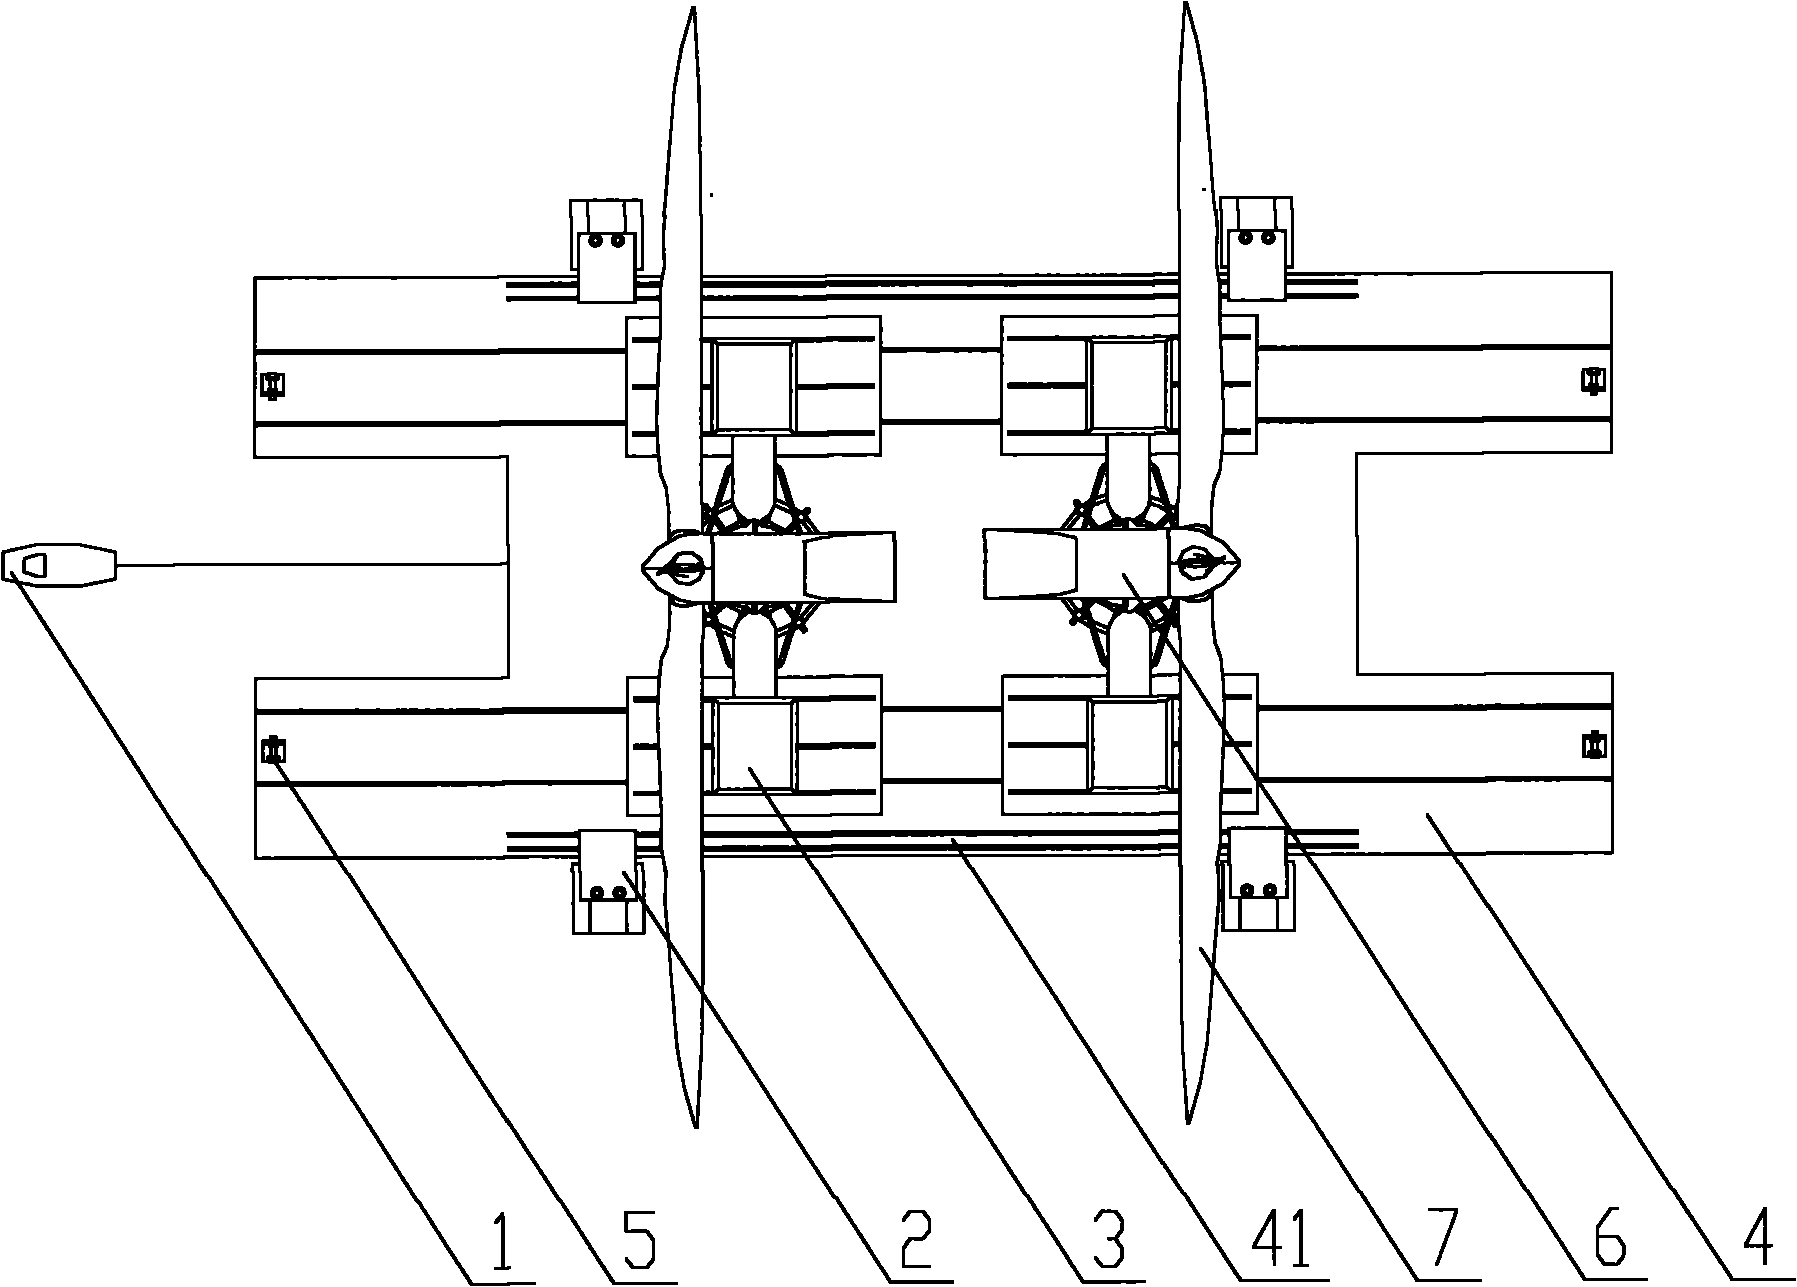 Wind turbine installation vessel and gravity center adjusting devices for same